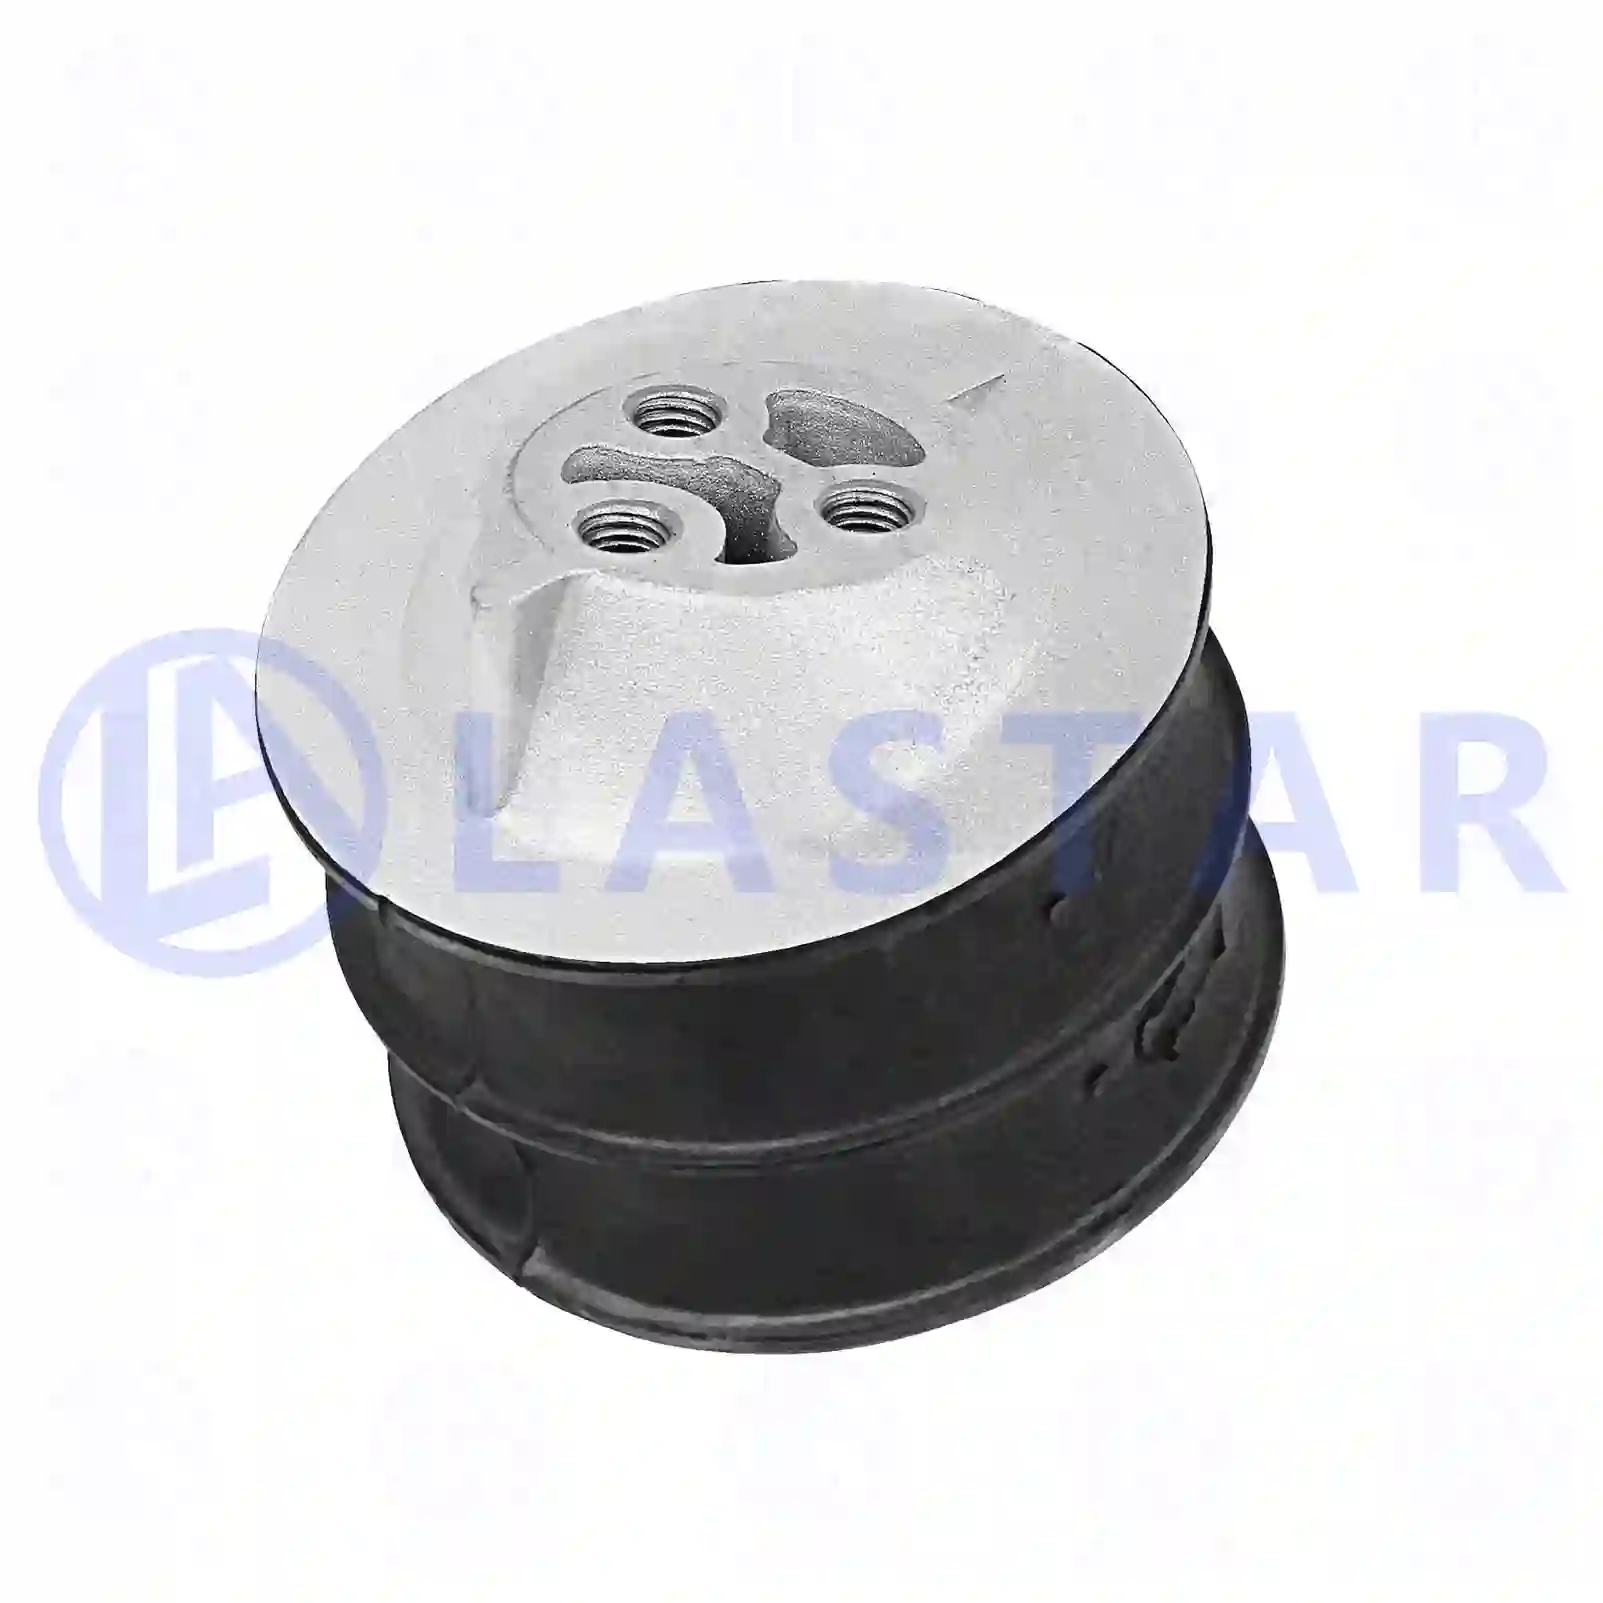 Rubber mounting, marked: yellow, 77703458, 1371729, 1423012, 1475868, ZG40111-0008 ||  77703458 Lastar Spare Part | Truck Spare Parts, Auotomotive Spare Parts Rubber mounting, marked: yellow, 77703458, 1371729, 1423012, 1475868, ZG40111-0008 ||  77703458 Lastar Spare Part | Truck Spare Parts, Auotomotive Spare Parts